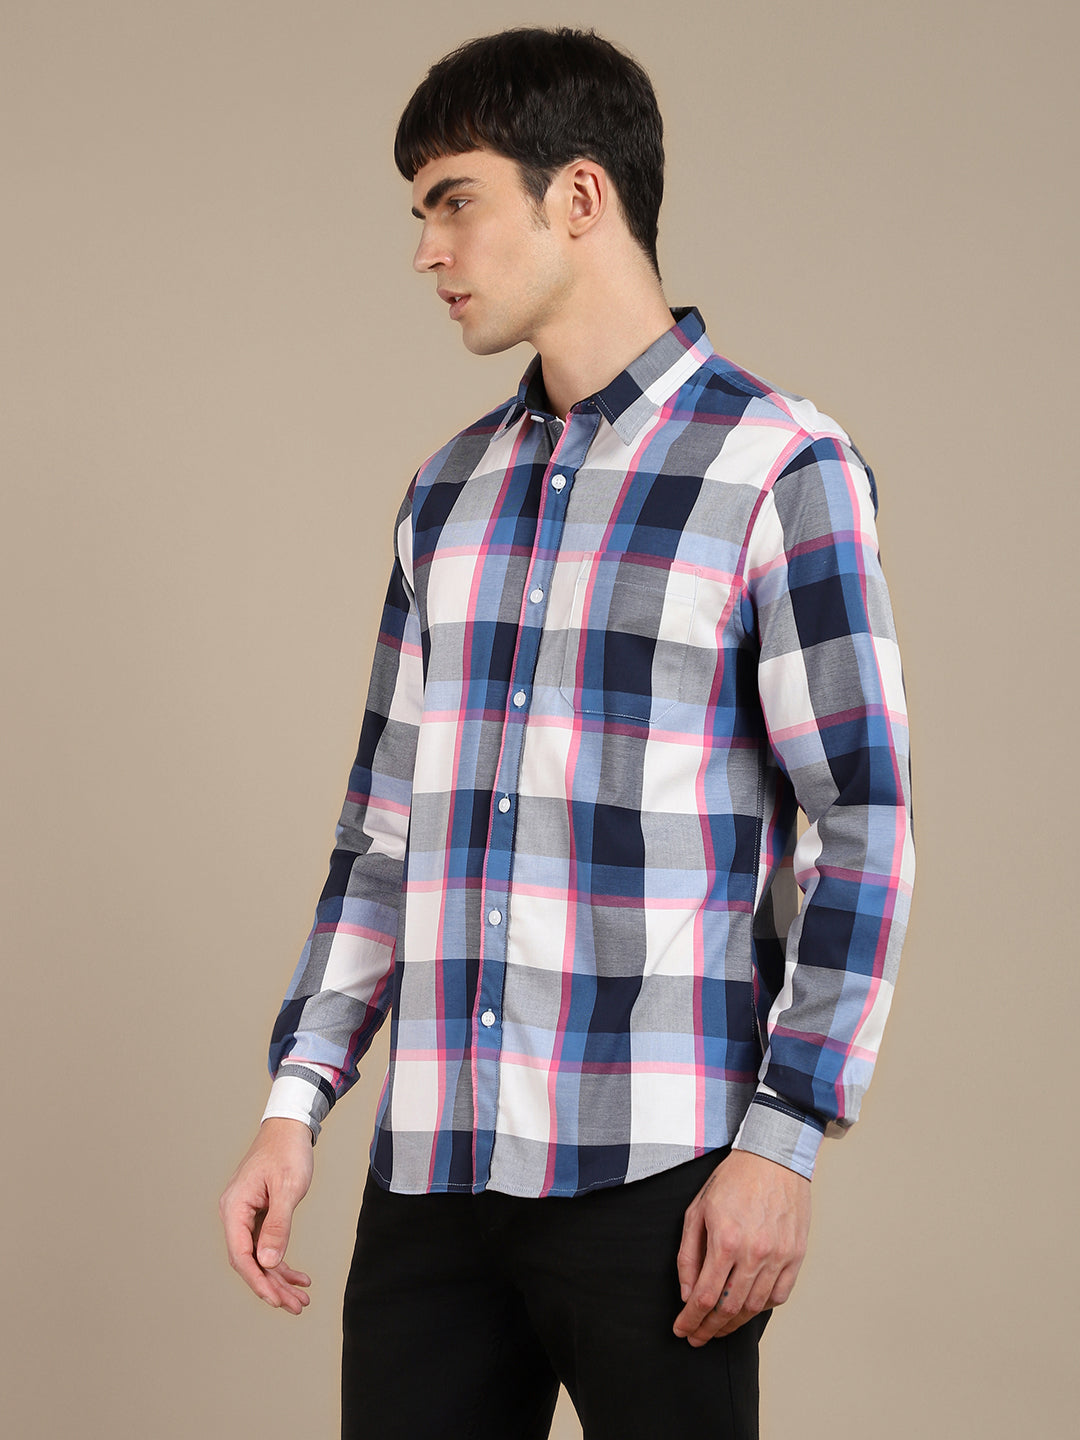 21 Best Casual Shirts for Men in 2022: Denim Shirts, Flannel Shirts, Polo  Shirts, & More